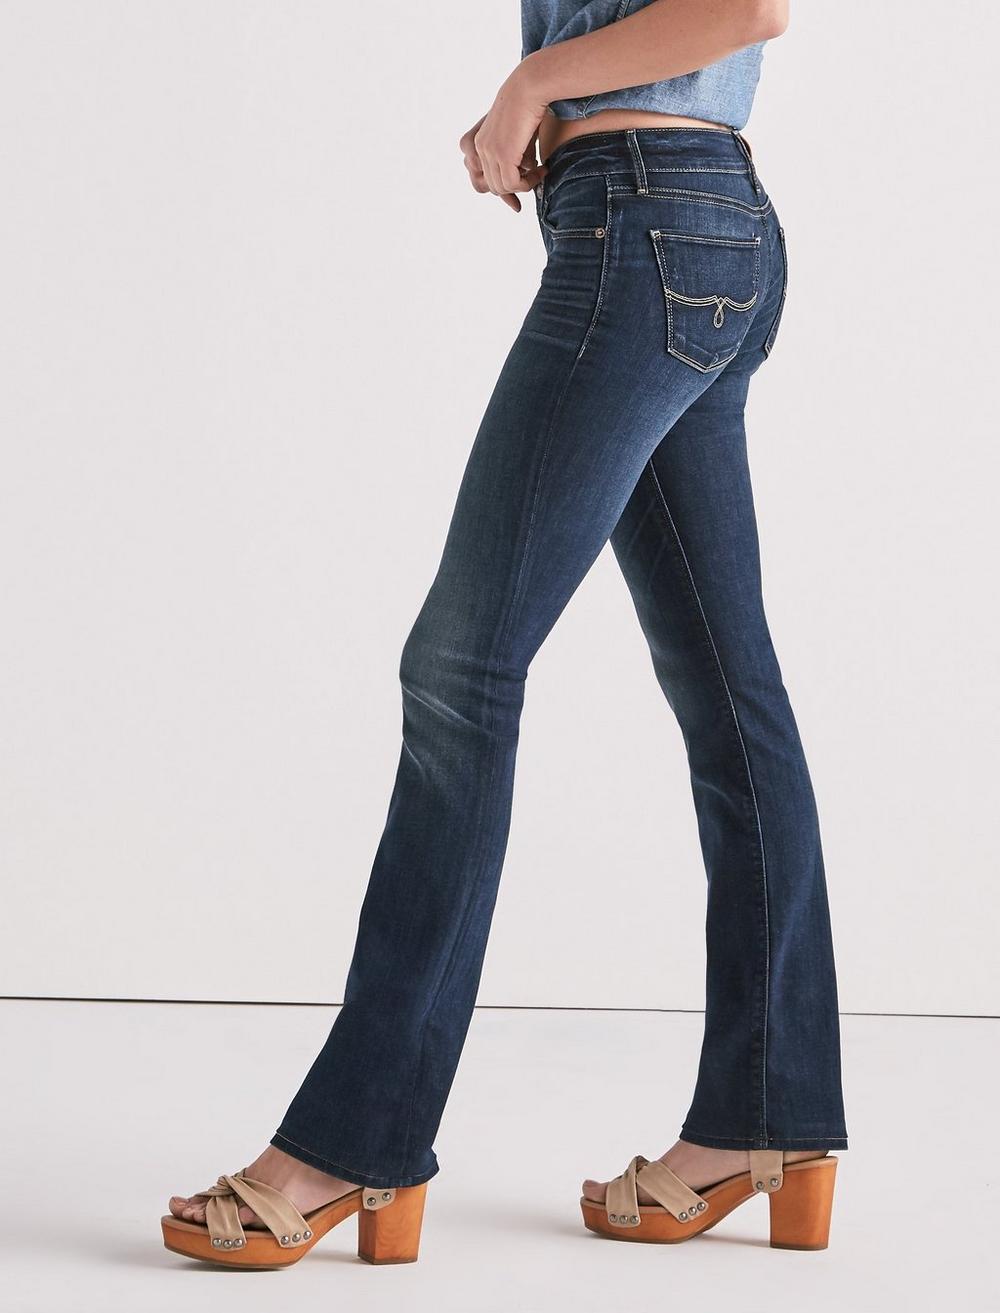 LOLITA MID RISE BOOTCUT JEAN IN SAND HILL | Lucky Brand